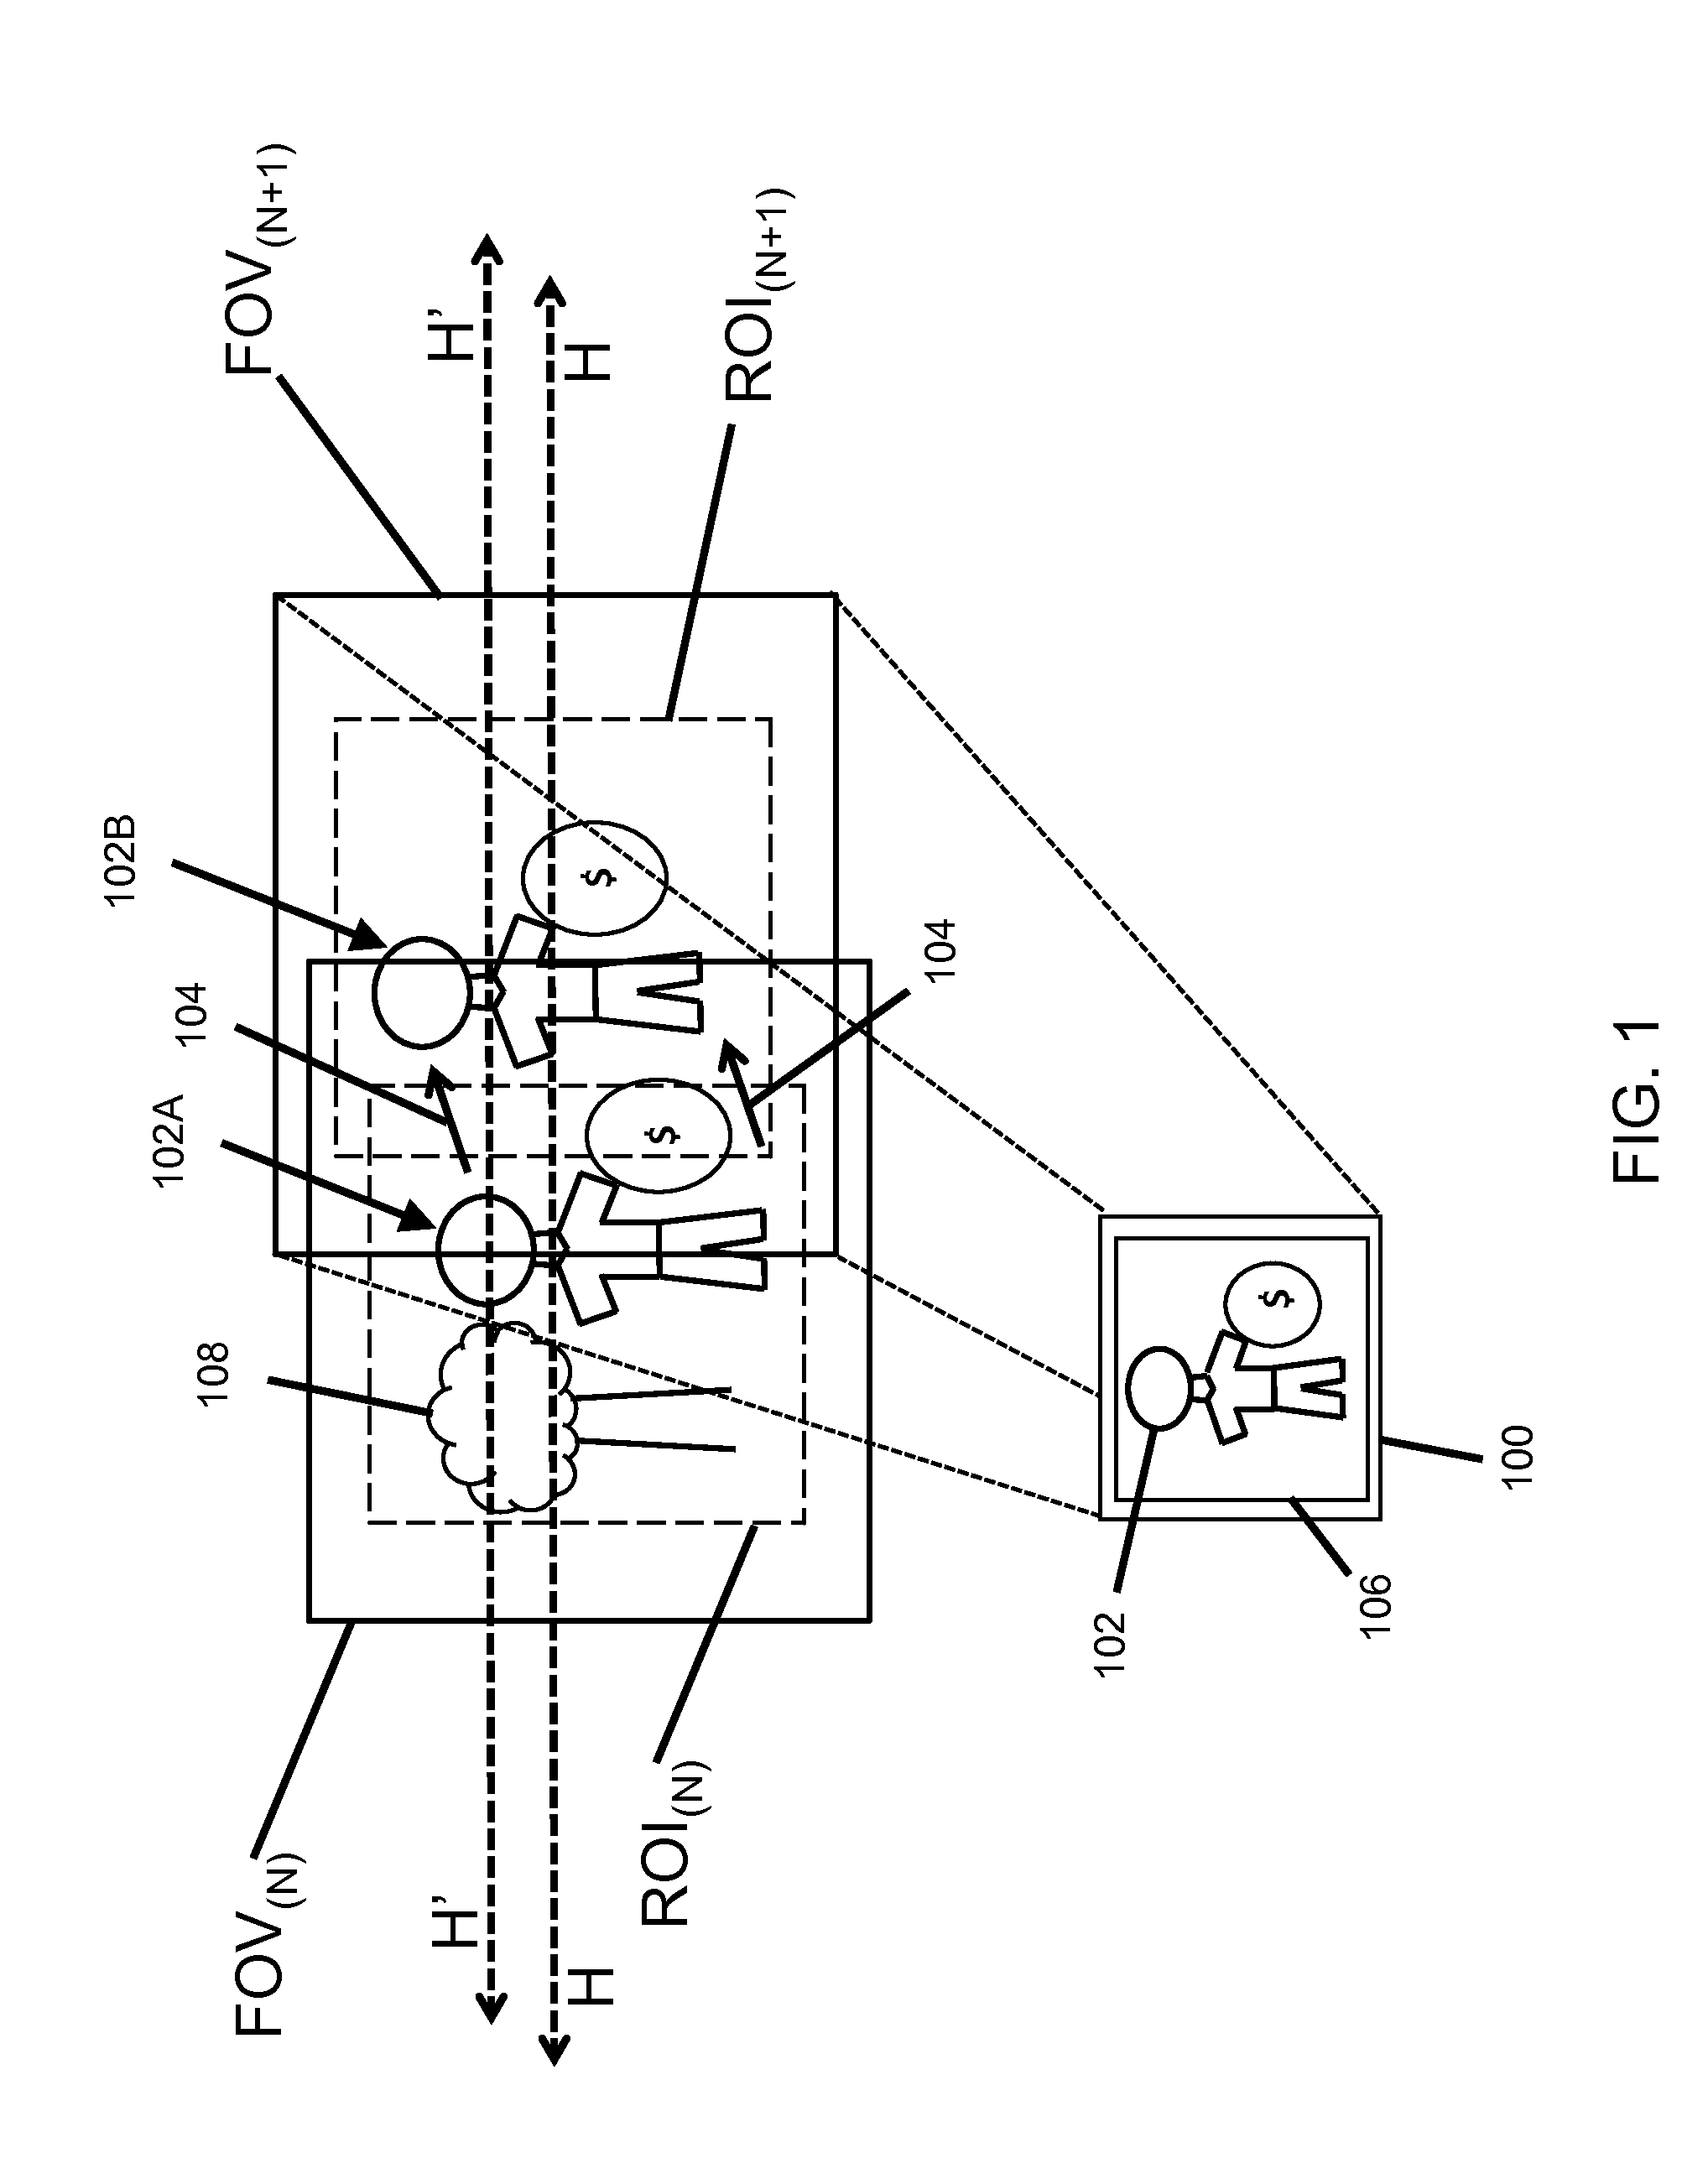 System and method of video stabilization during movement